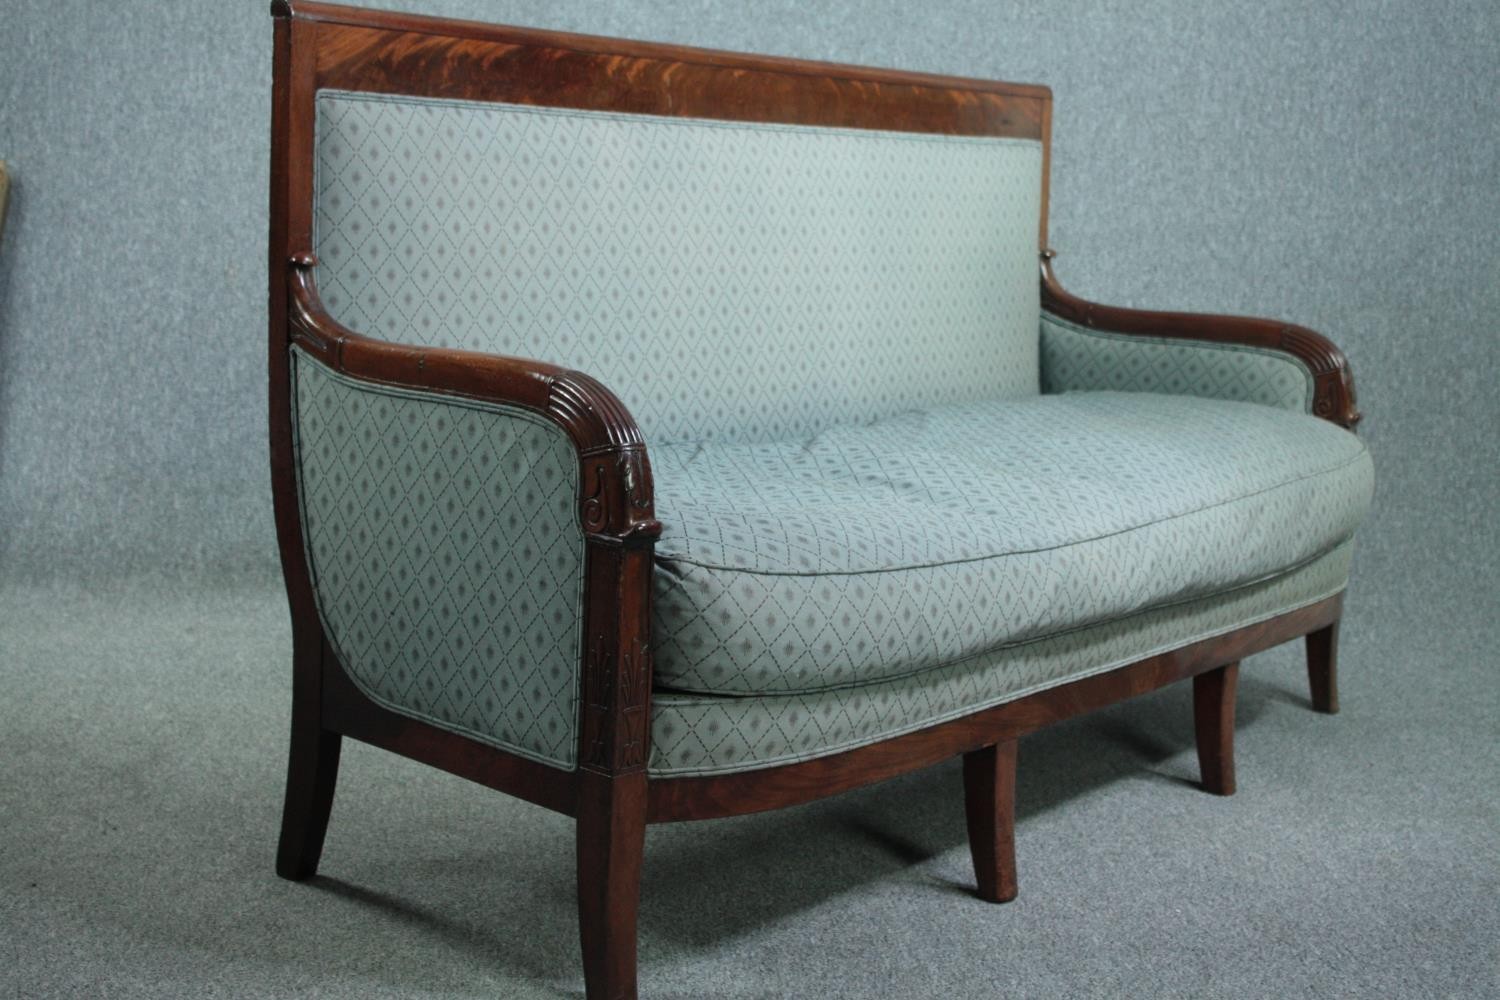 Sofa, 19th century Empire style flame mahogany, reupholstered. H.94 W.170 D.65cm. - Image 2 of 4